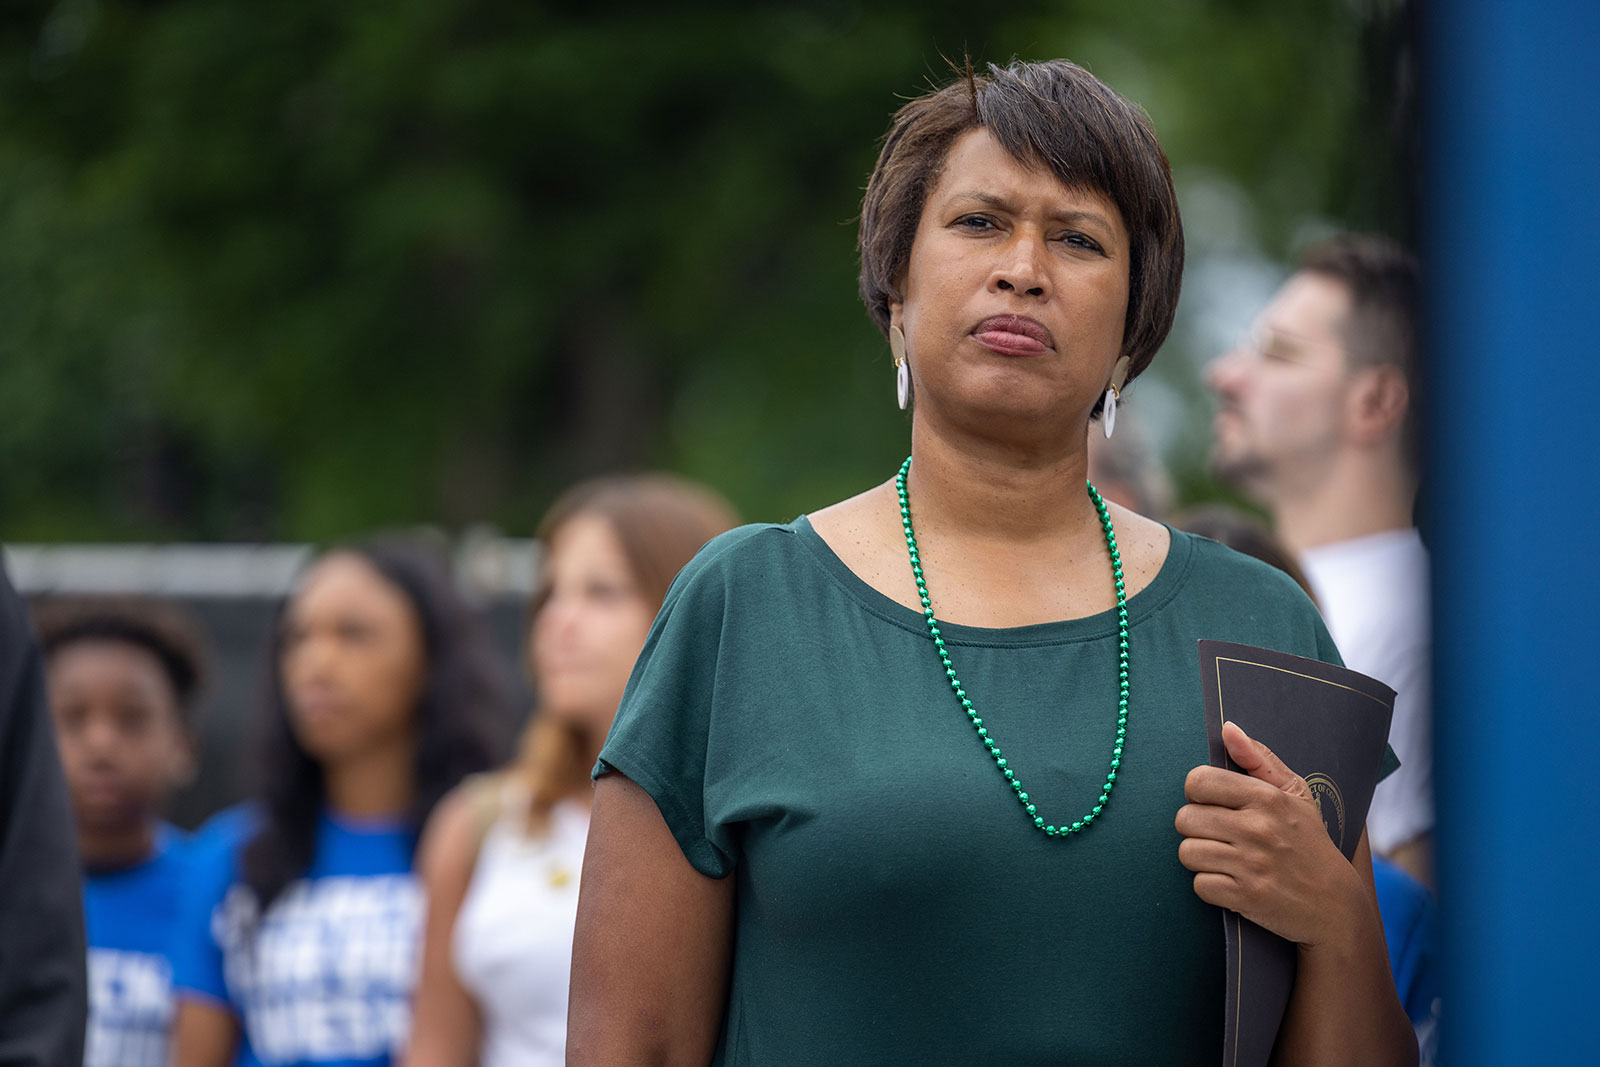 Washington, DC, Mayor Muriel Bowser prepares to speak at a March For Our Lives protest on the National Mall on June 11.